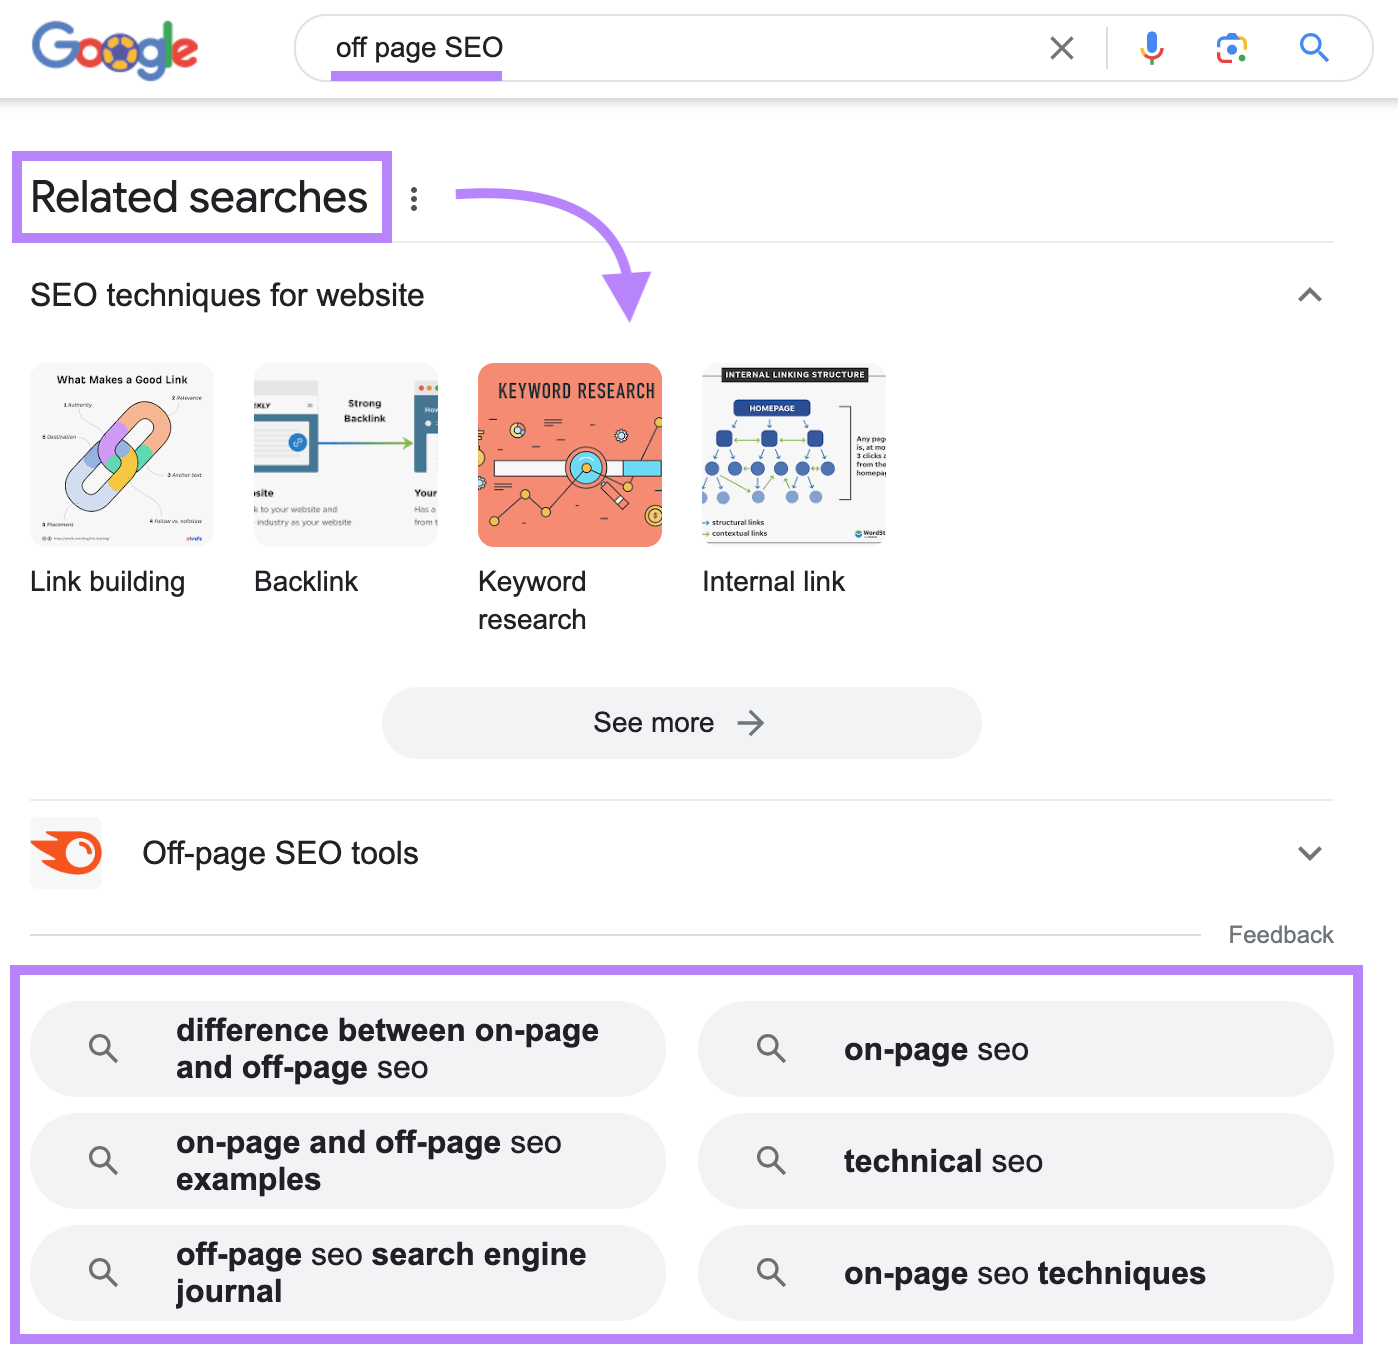 Google feature called “related searches” shows for "off page SEO" search 